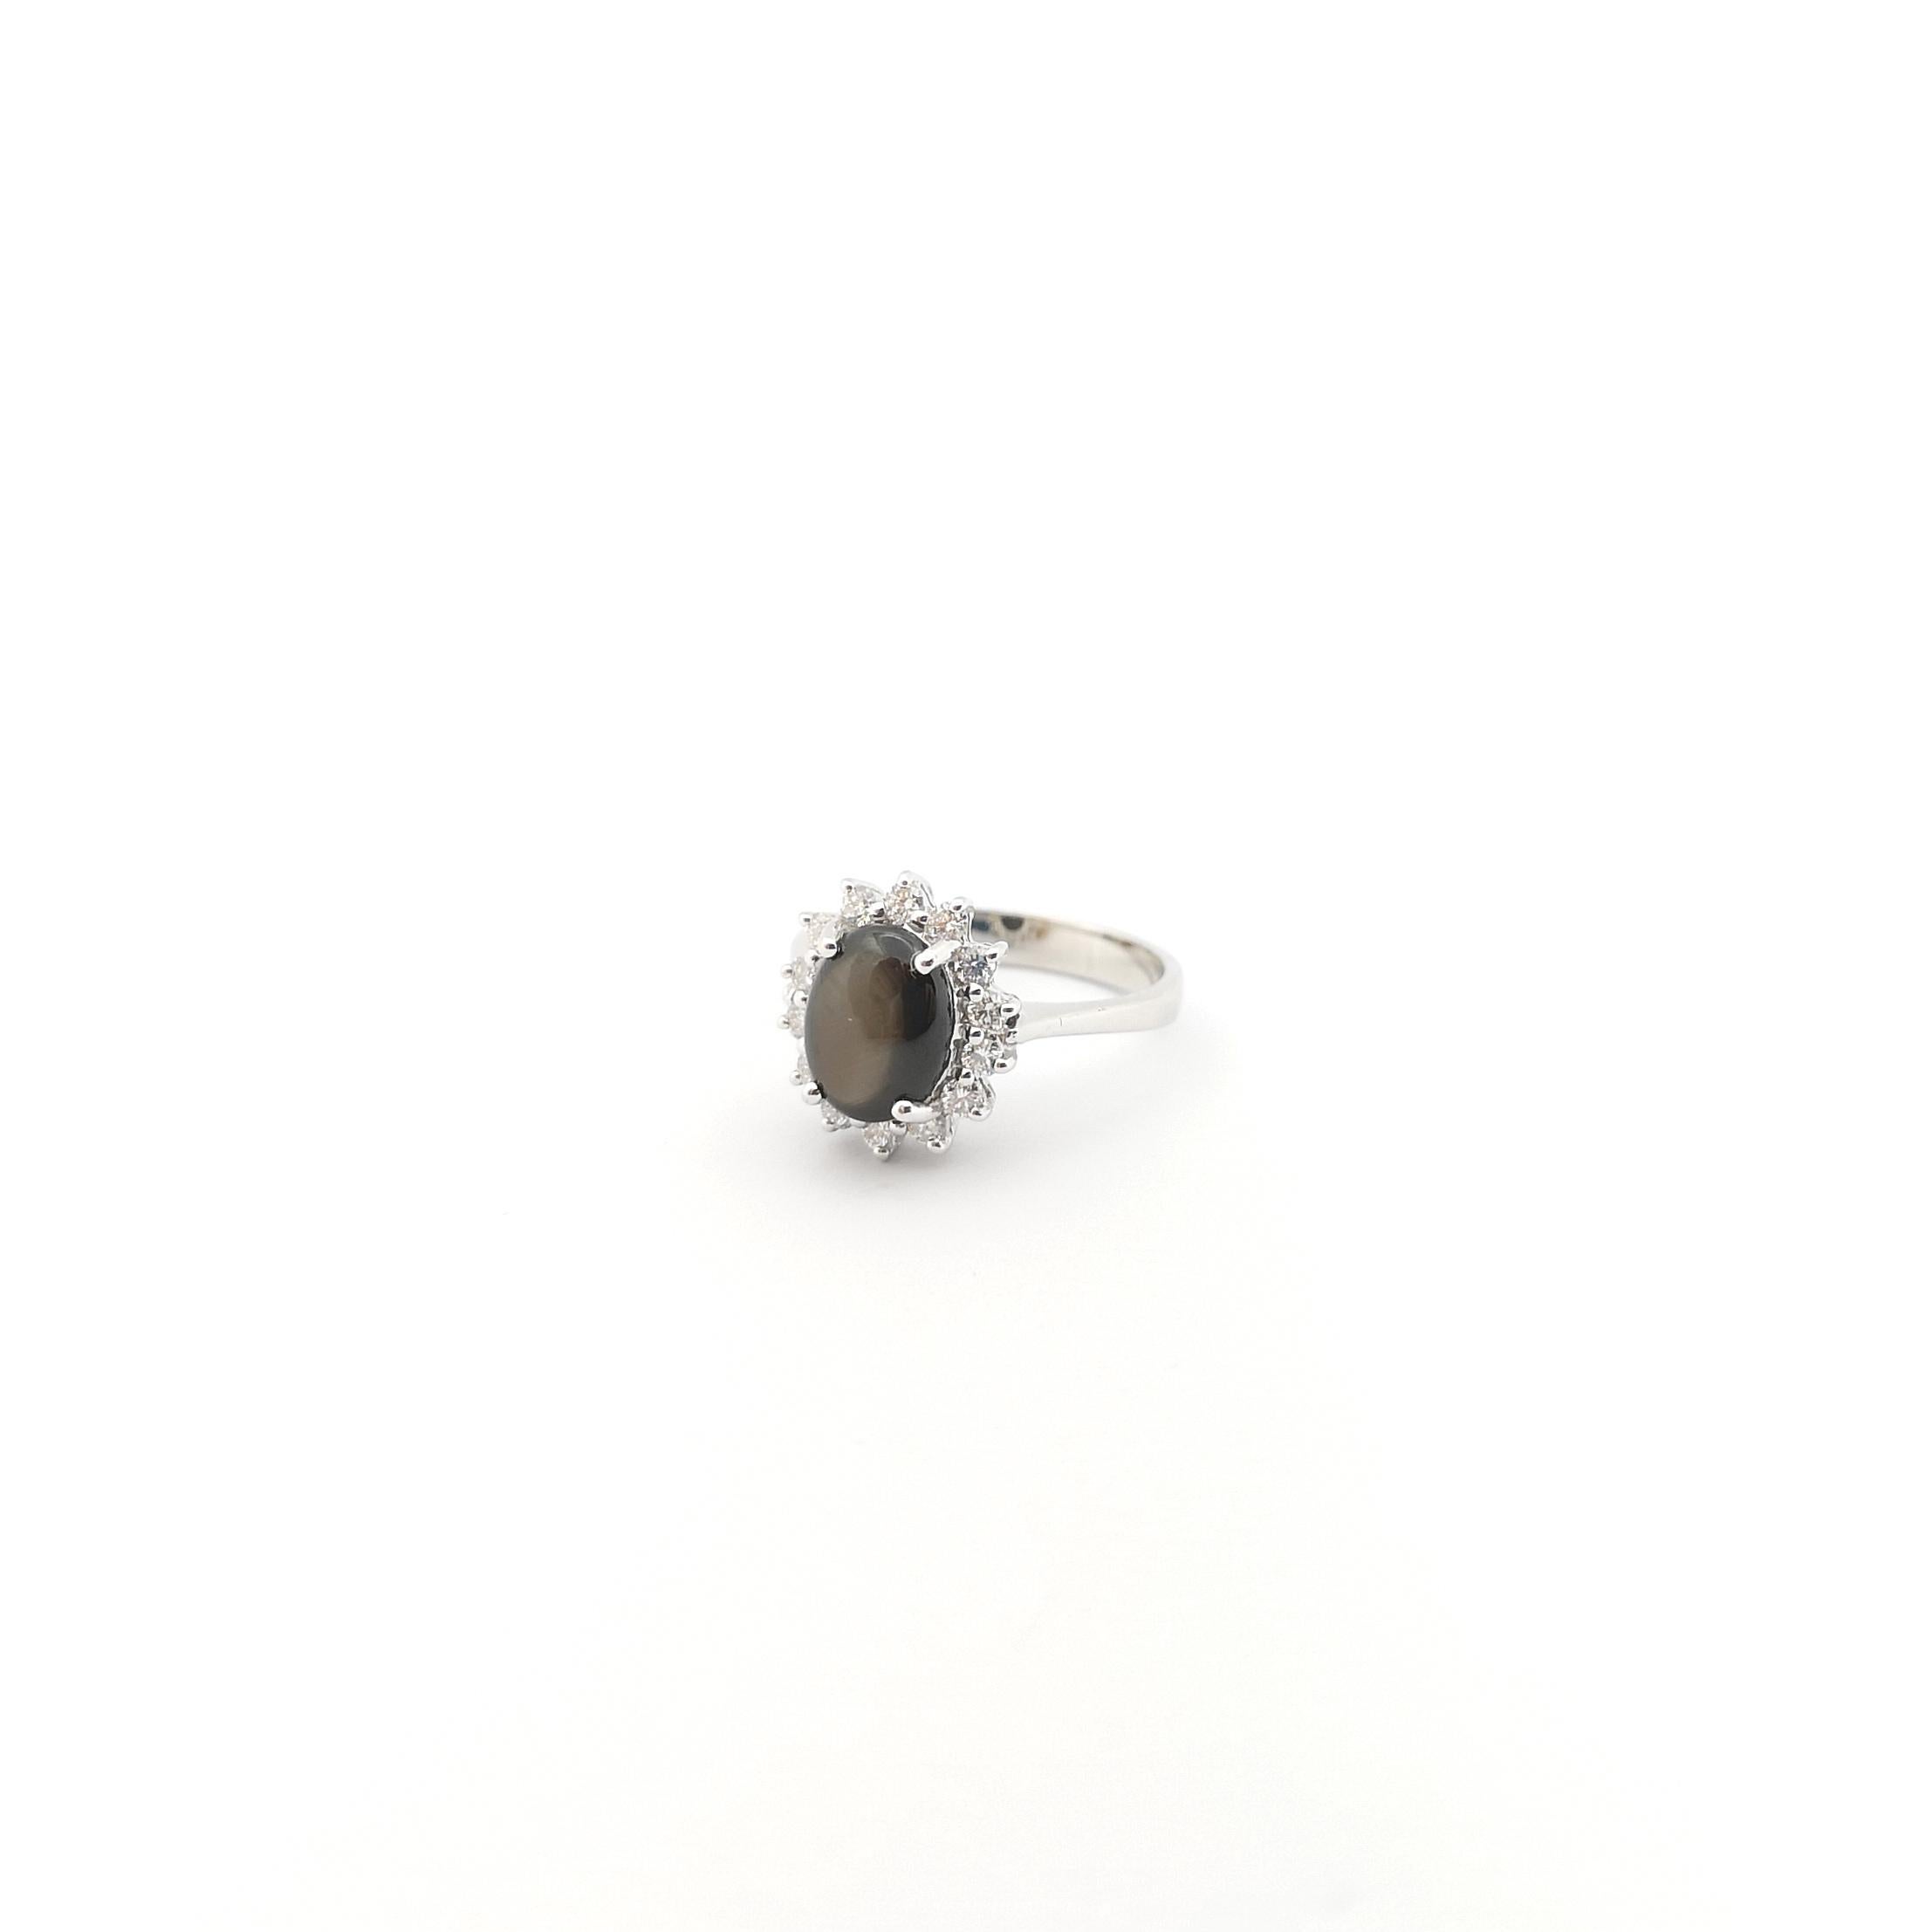 Black Star Sapphire with Diamond Ring set in 14K White Gold Settings For Sale 1